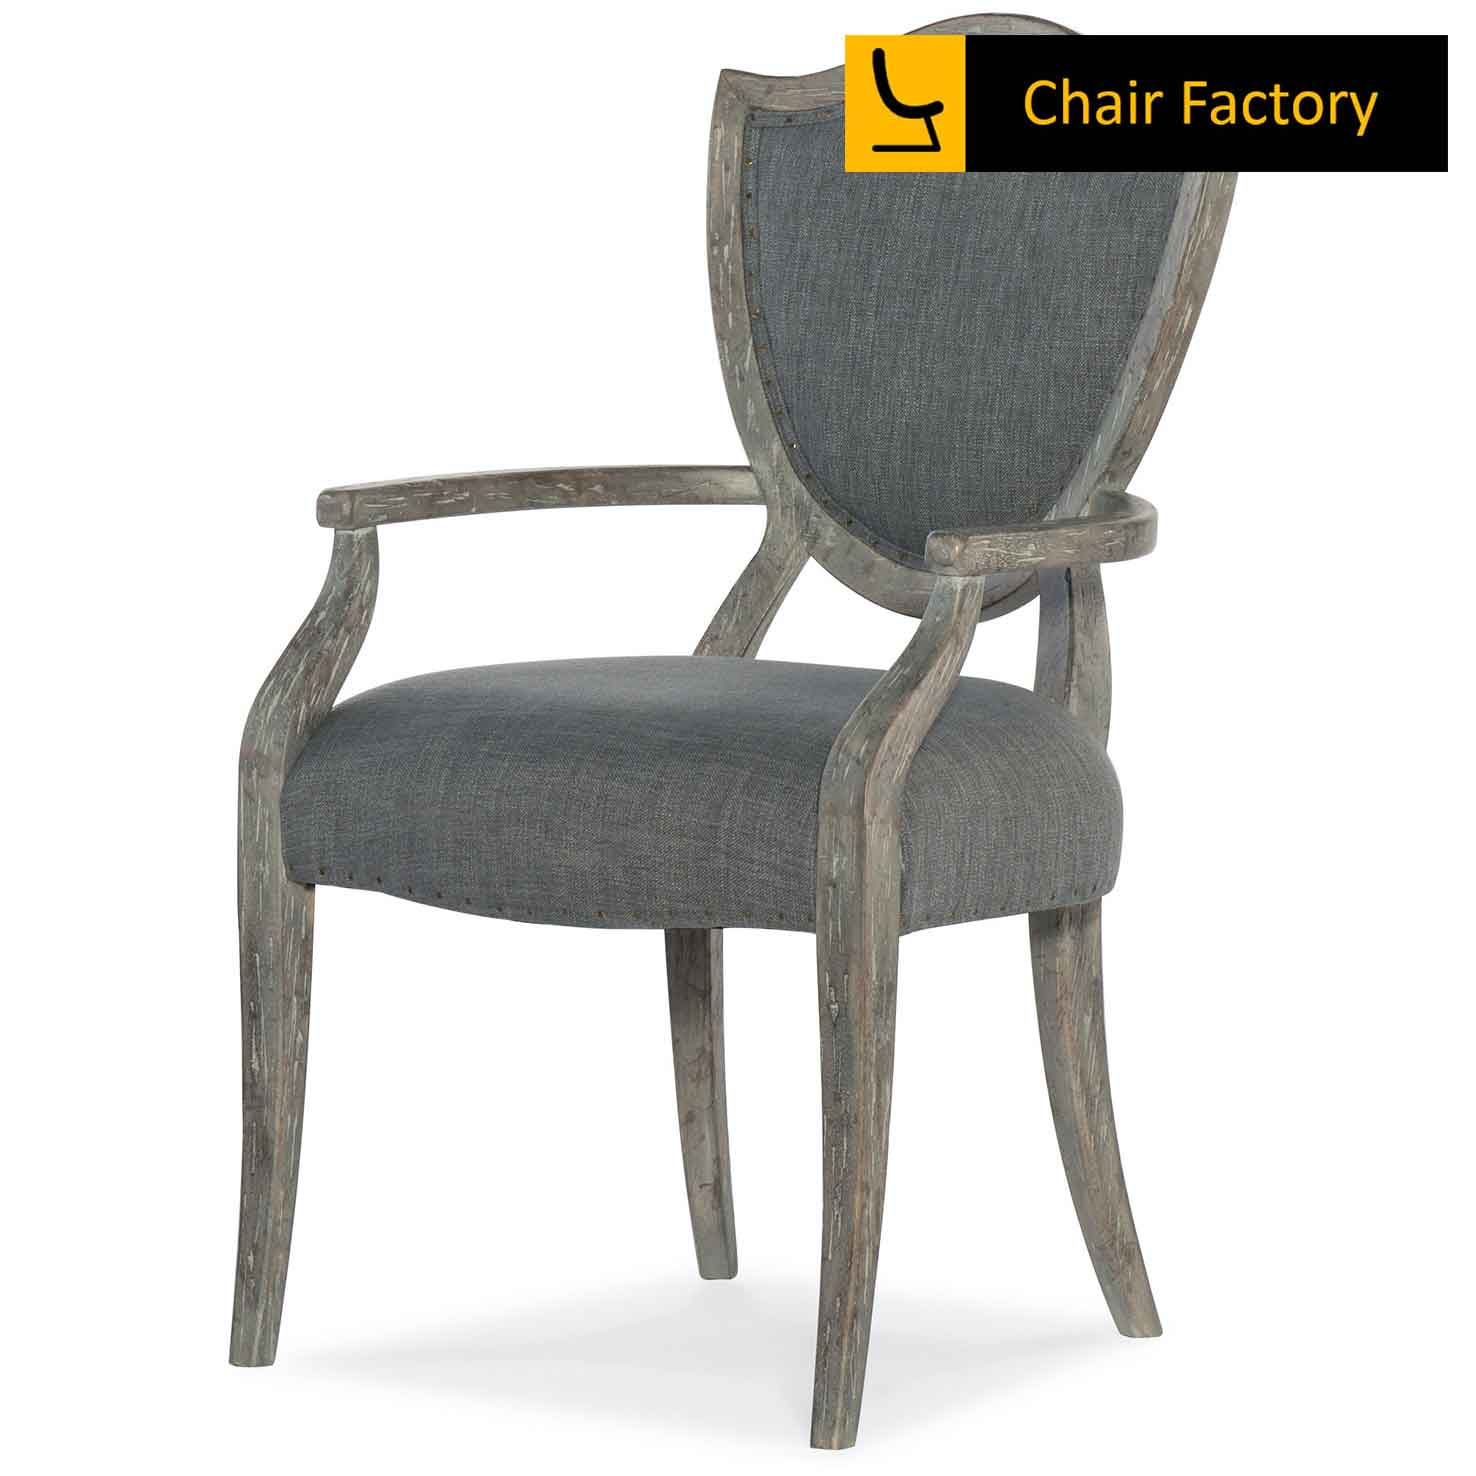 JeanSteinhart Antiqua with Arms dining chair